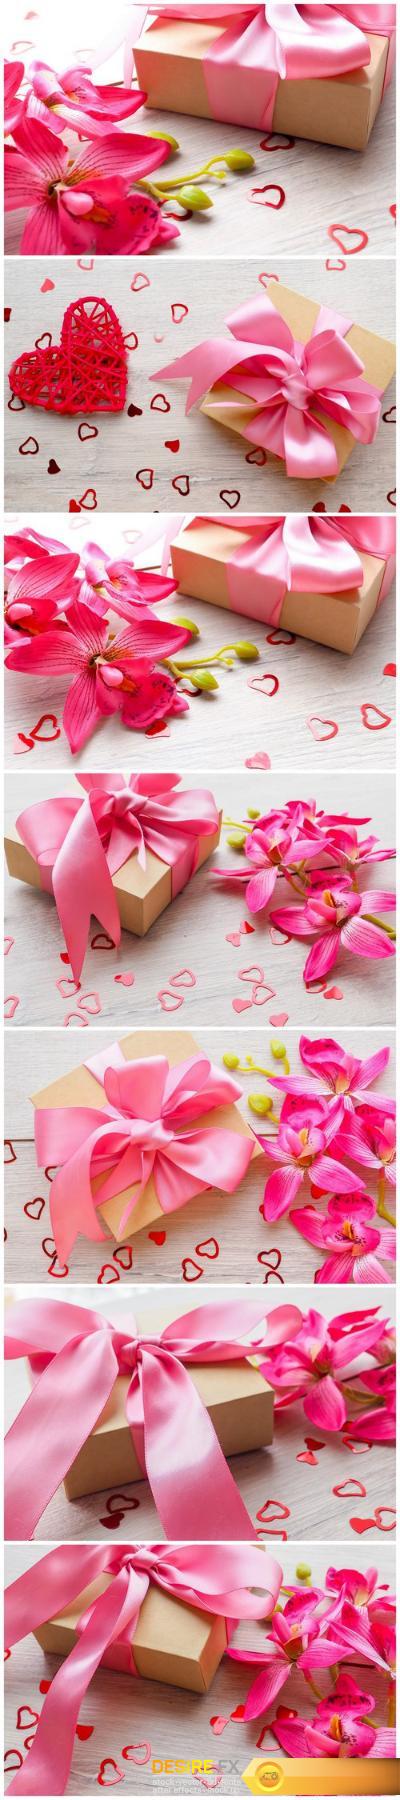 Gentle sweet composition for Valentines day, birthday, wedding in pink and red colors – Set of 7xUHQ JPEG Professional Stock Images